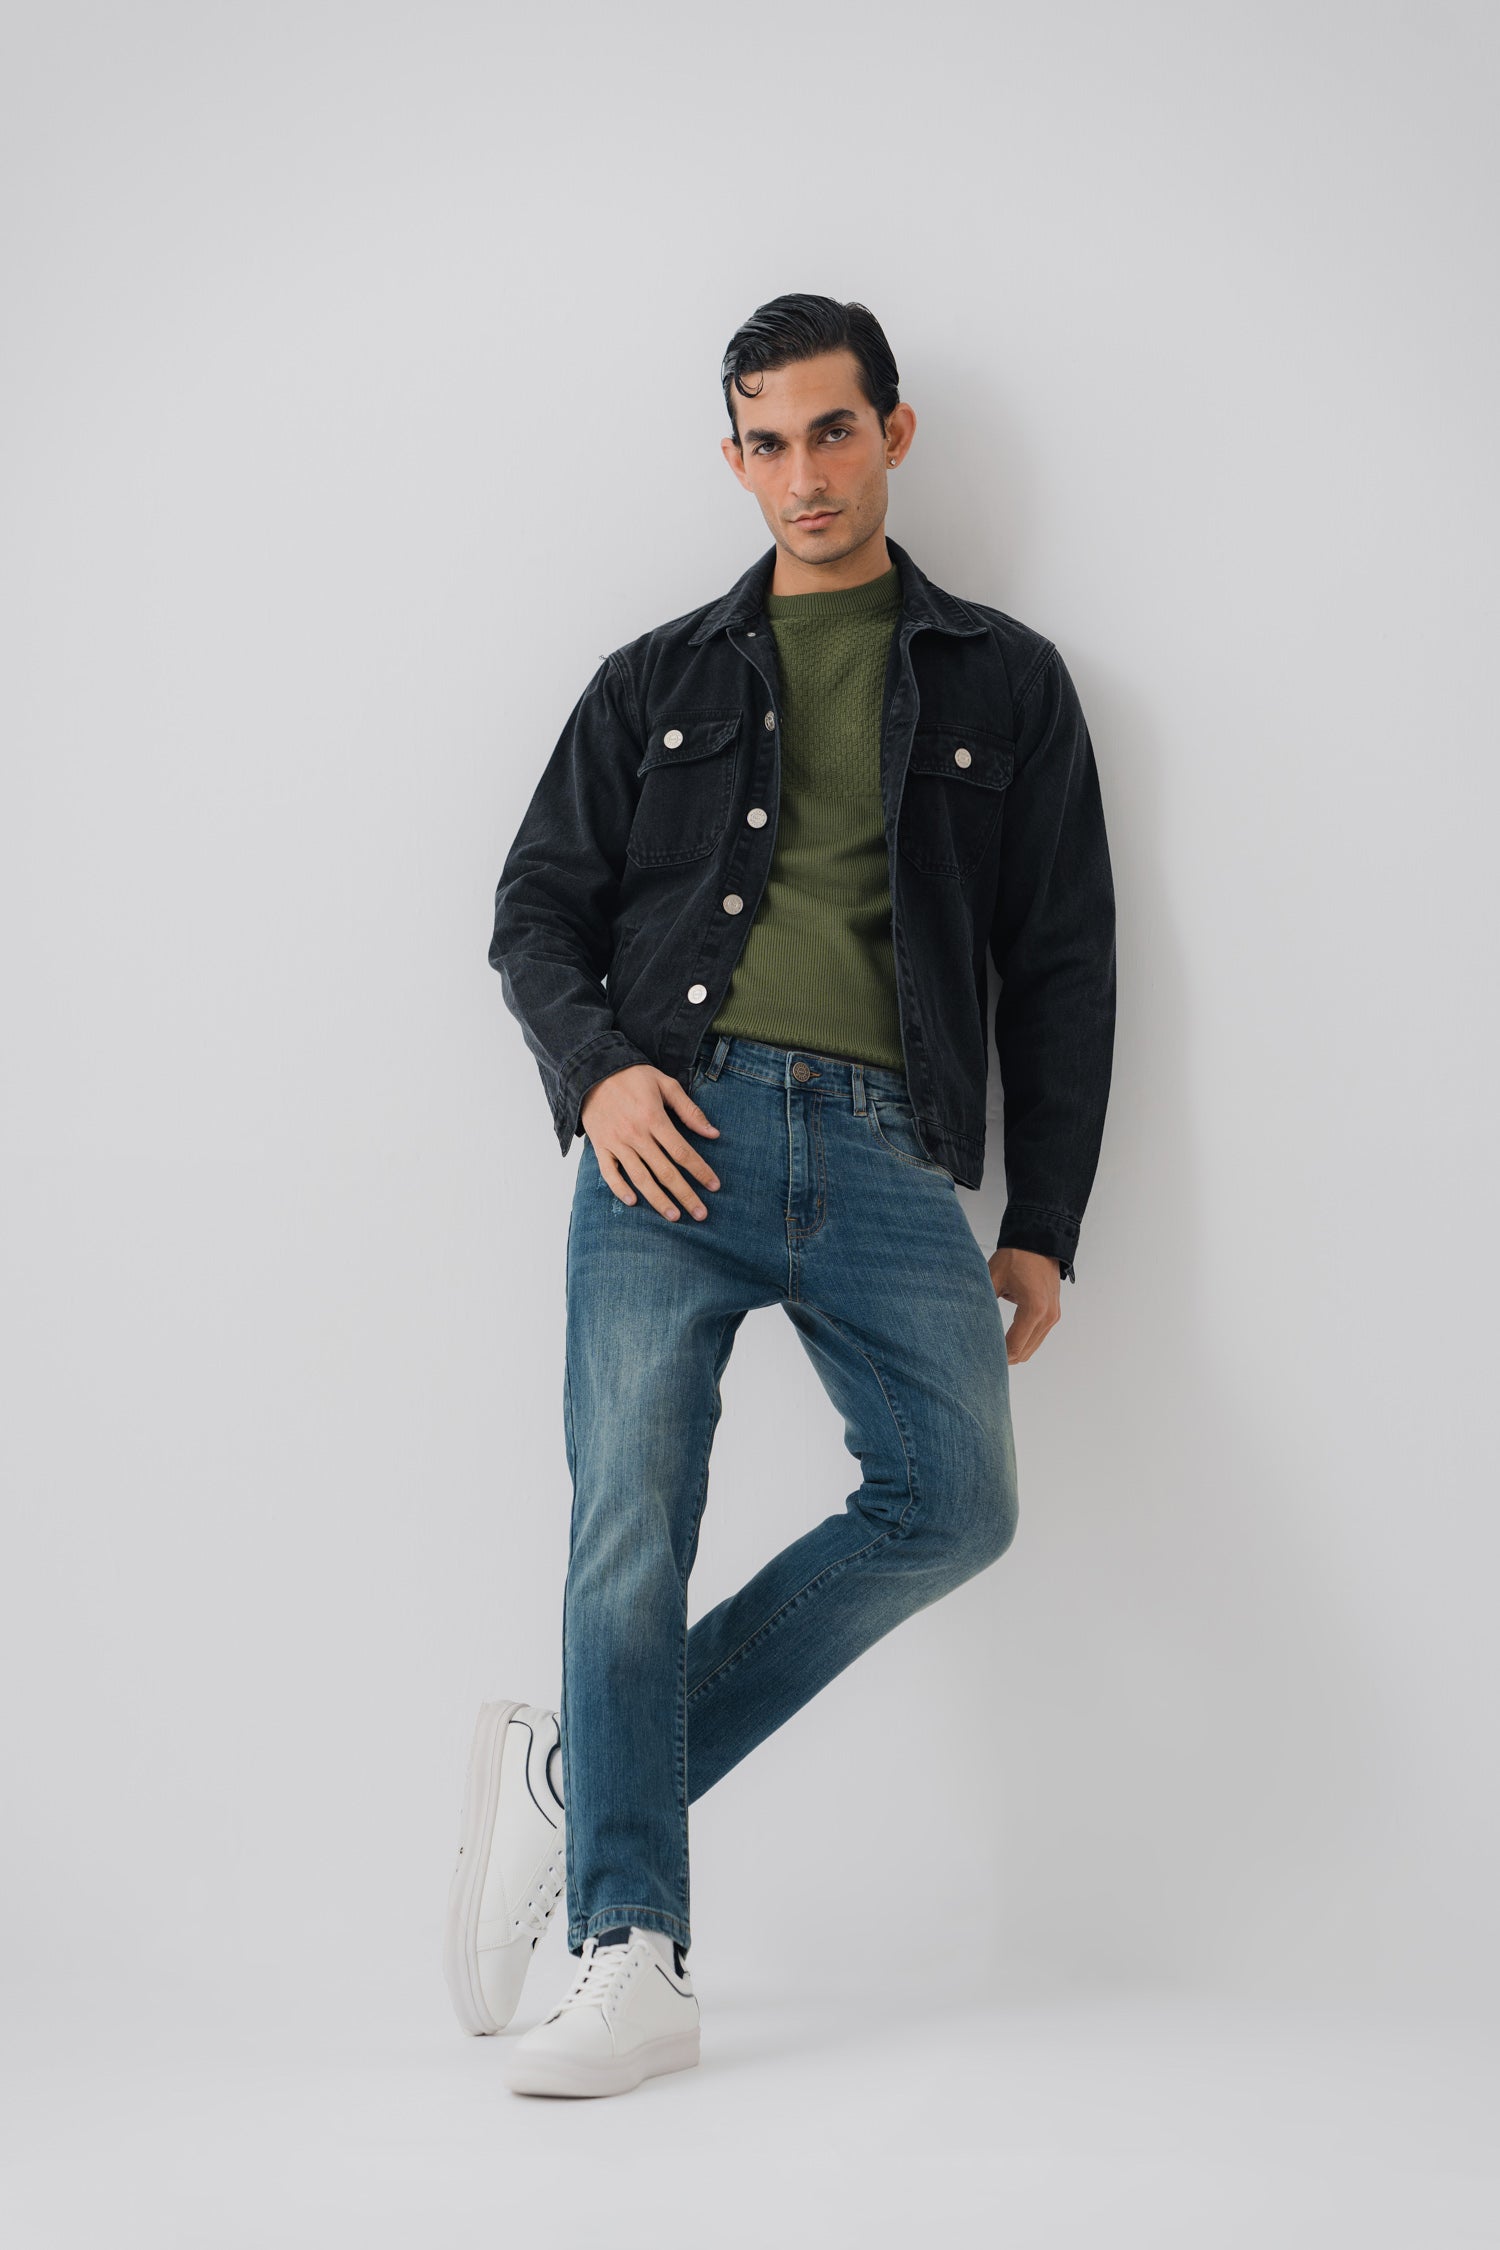 Buy Best Men Jackets Online - New Jackets Collection